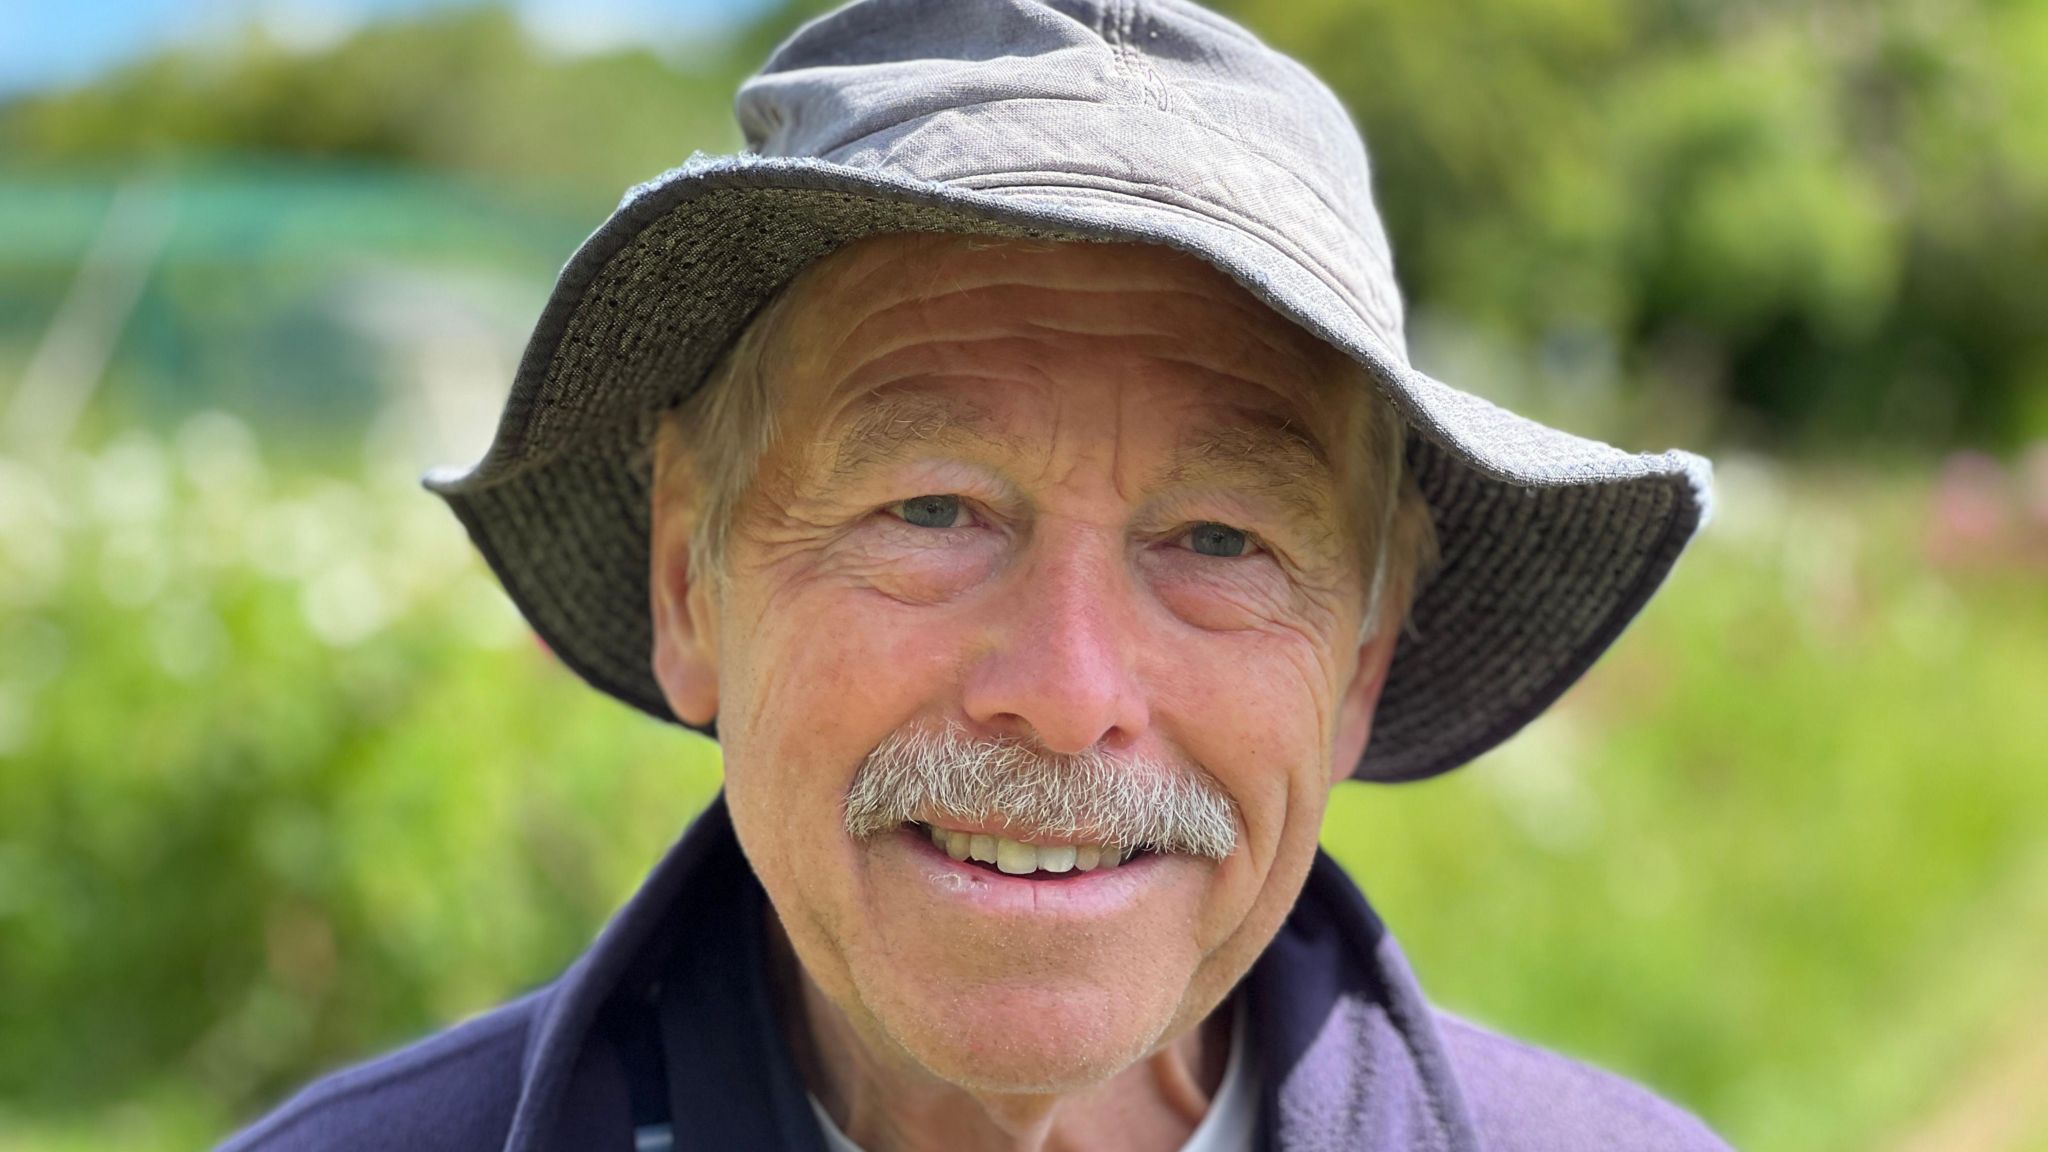 Close up portrait of Chris Pearce wearing a hat in the allotments